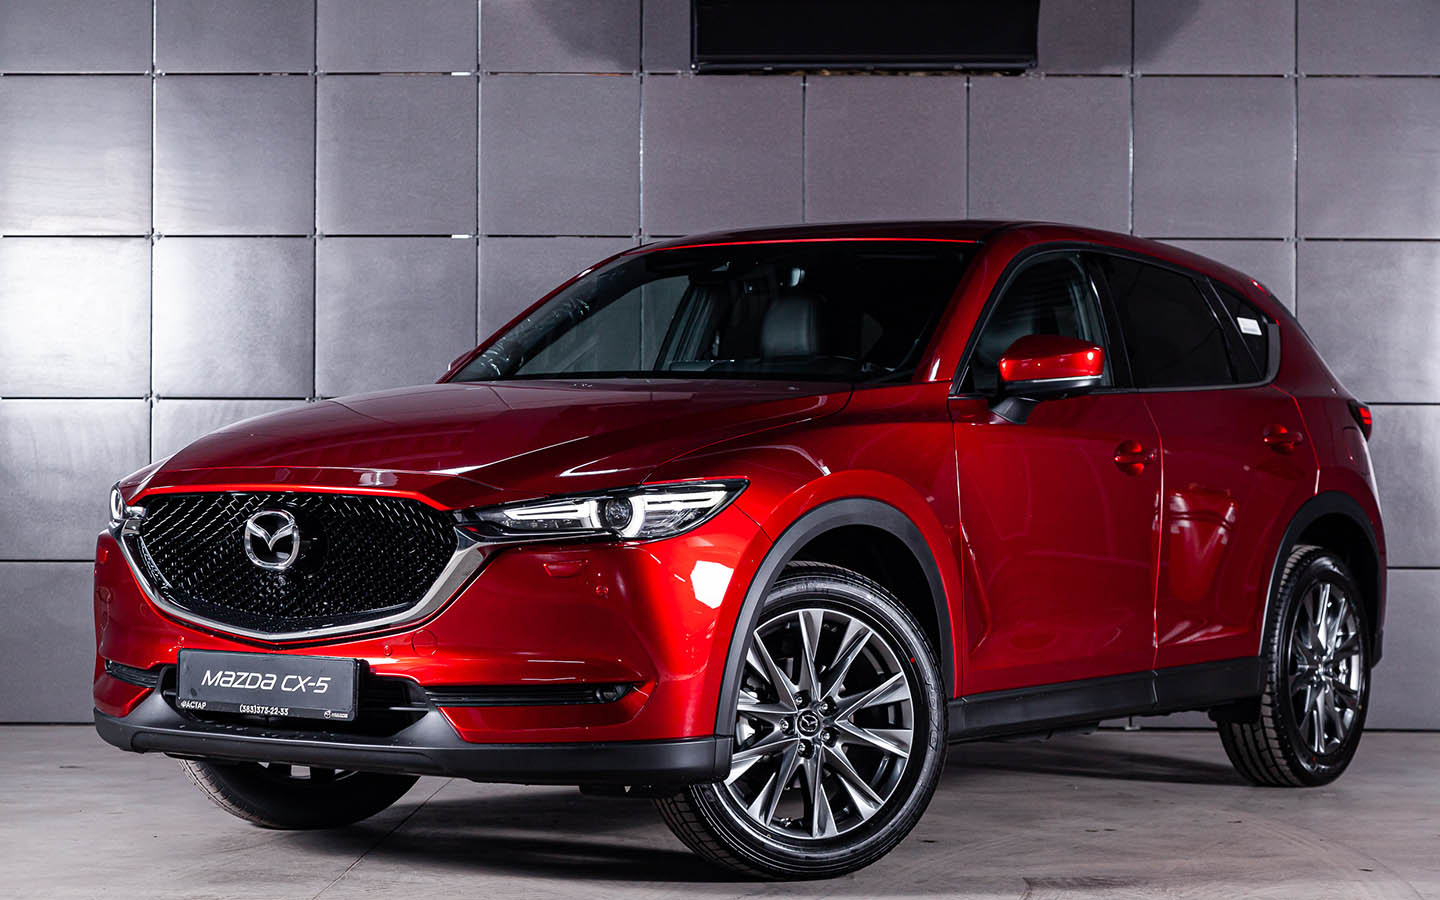 Mazda CX-5 comes fourth among the top used Mazda cars under 150k in UAE